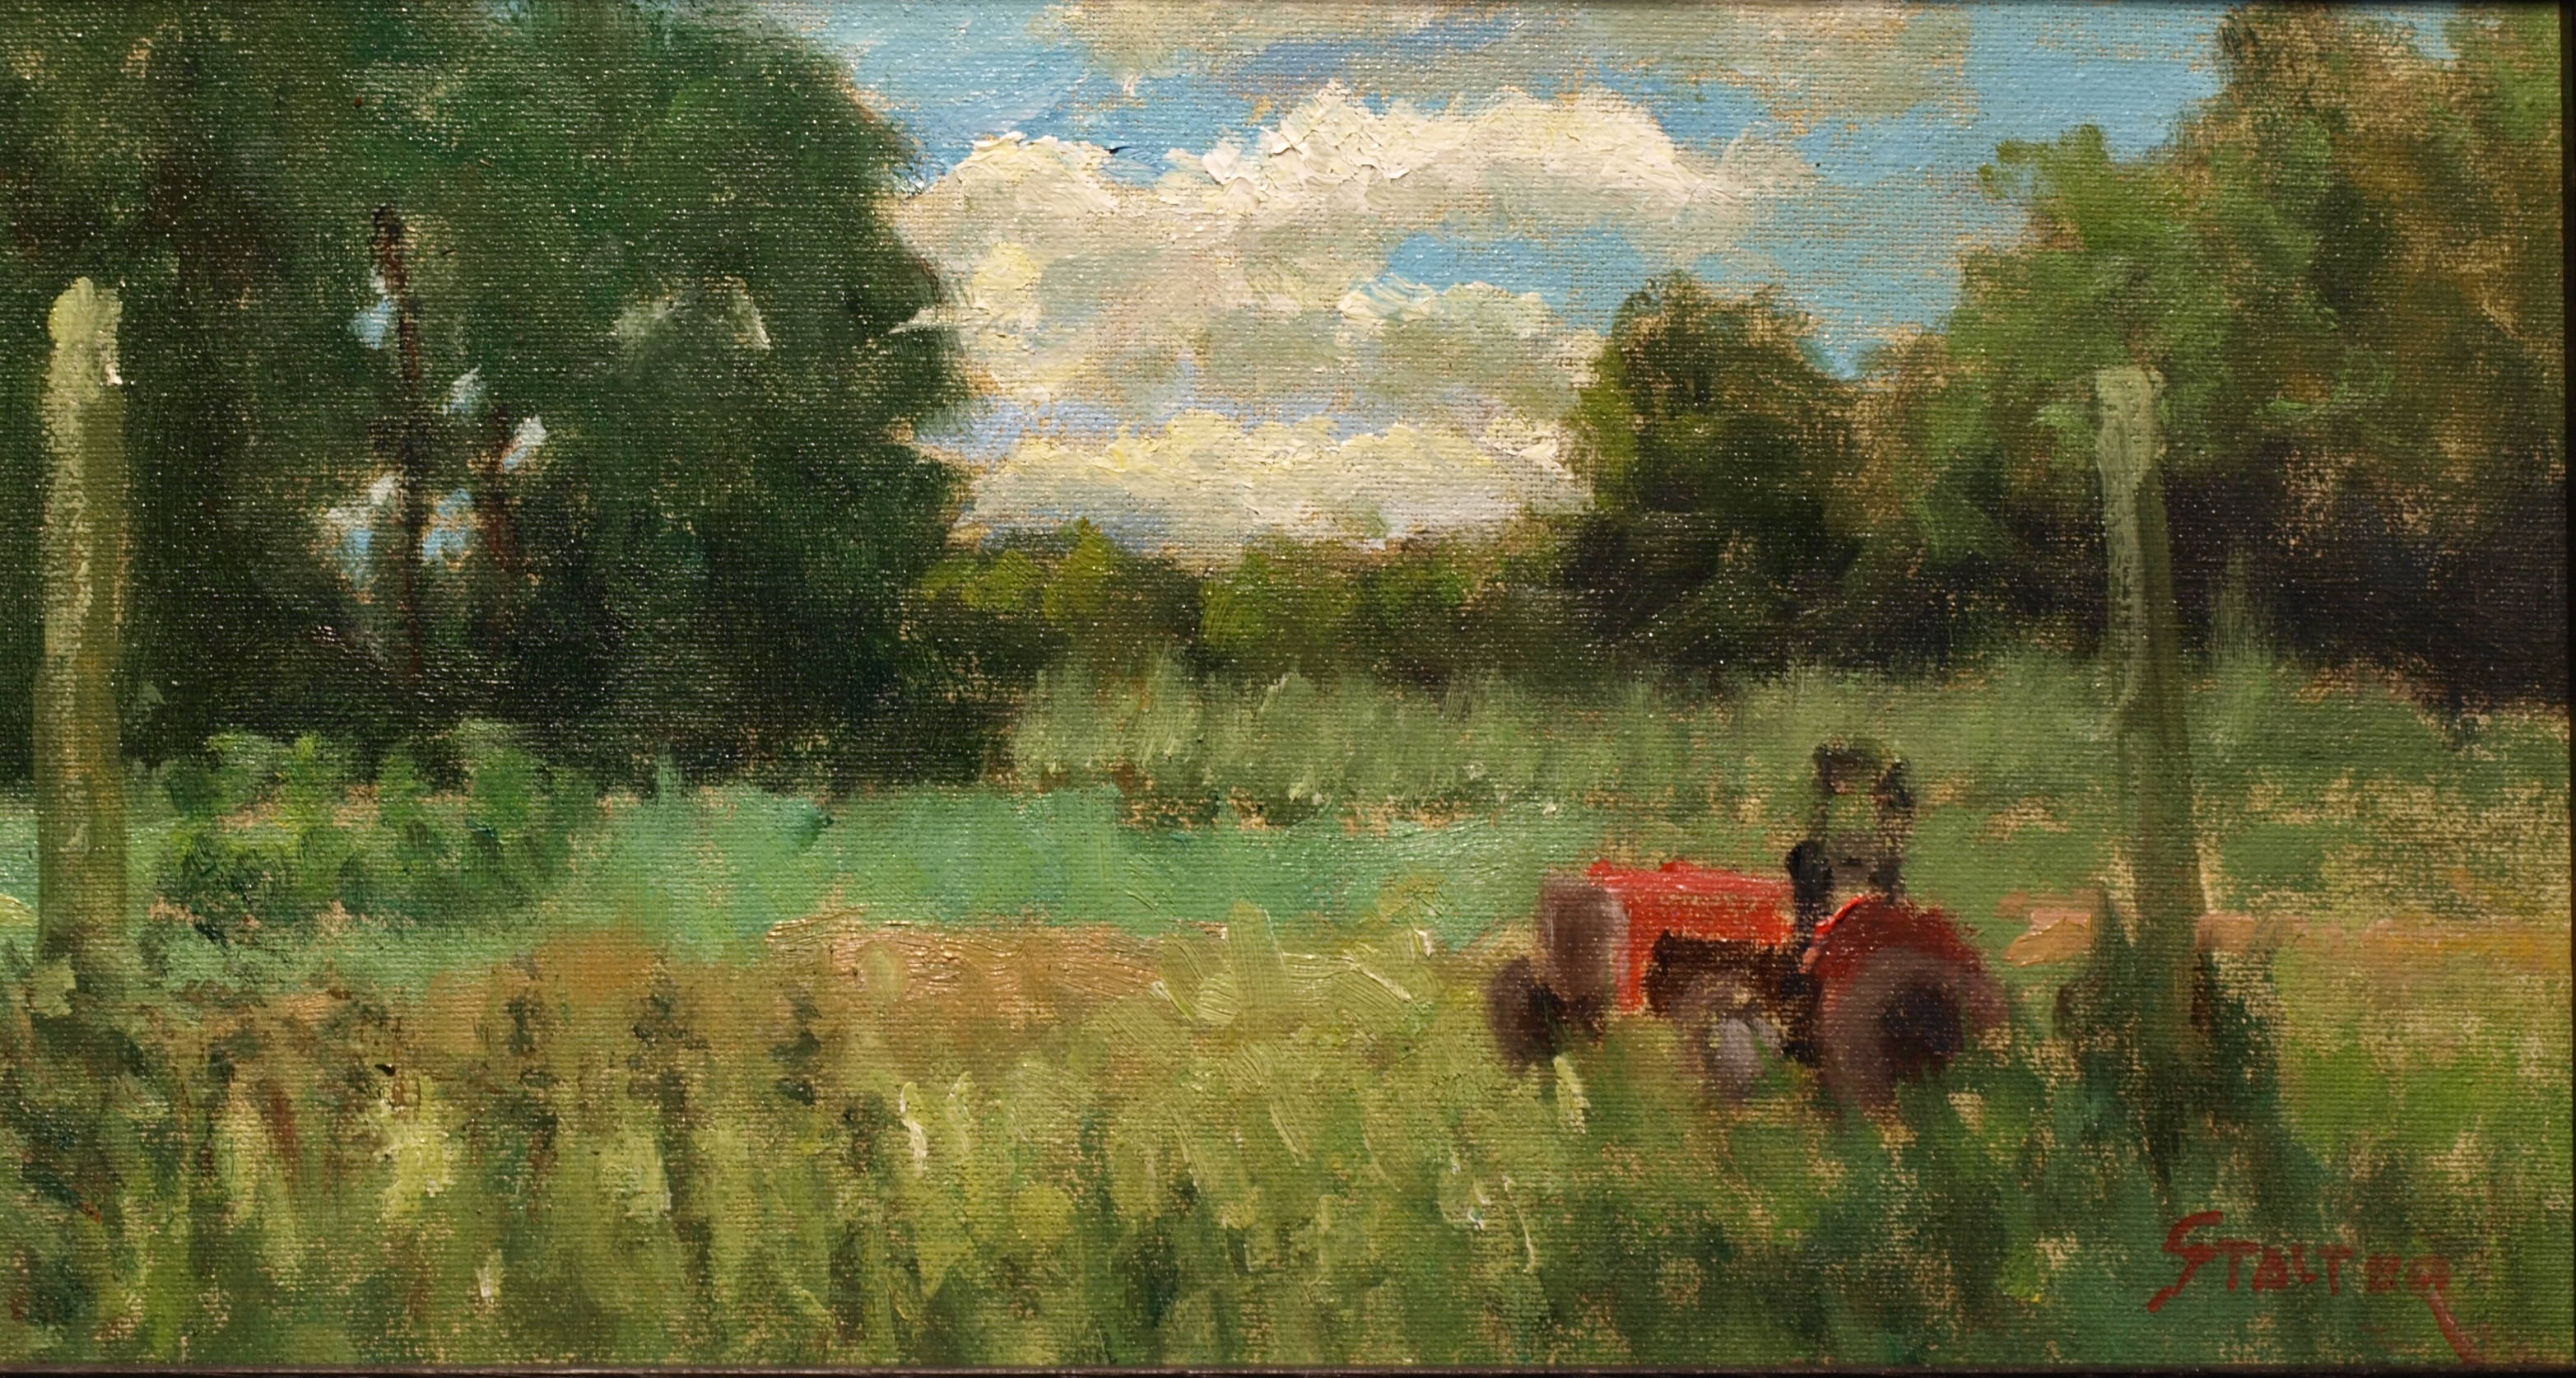 Megan's Tractor, Oil on Canvas on Panel, 8 x 14 Inches, by Richard Stalter, $225